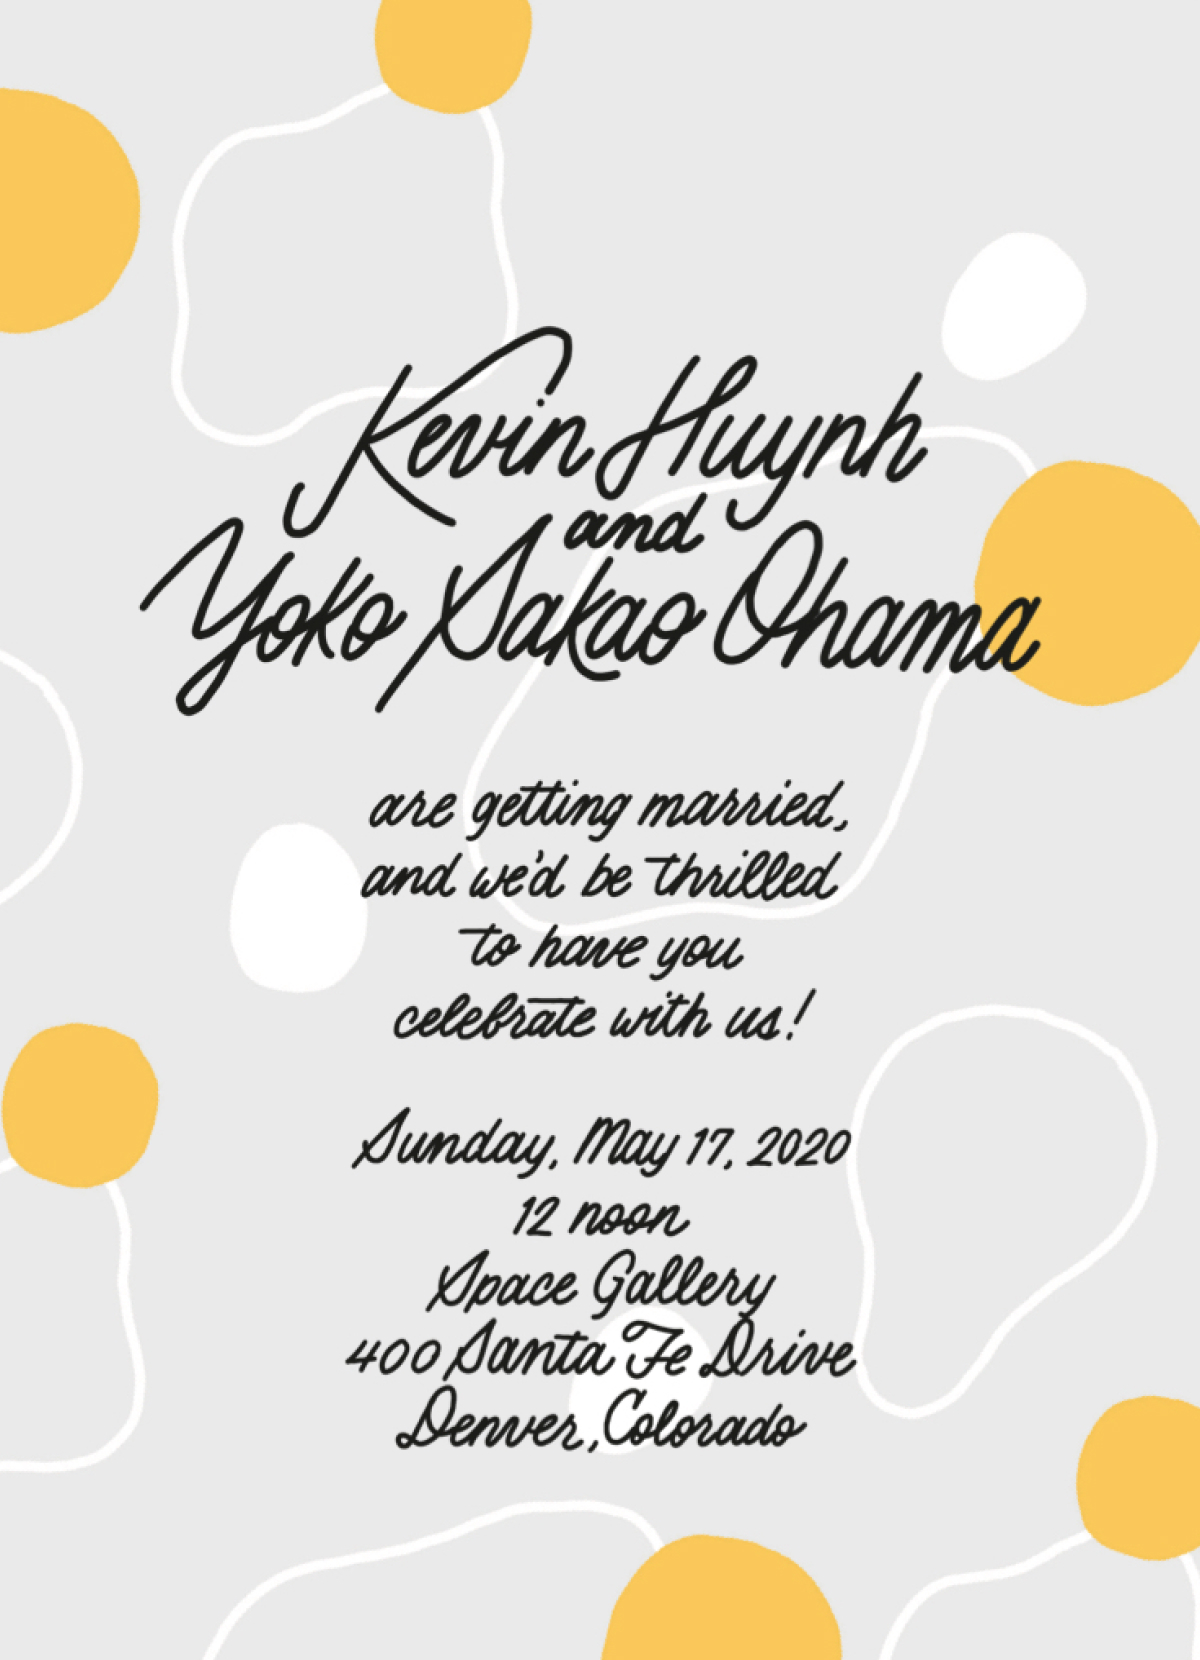 Our invitation: Hand-drawn blobby white shapes, orange yolky circles on a light gray background. The invitation text, which I guess isn’t really that important, is also hand drawn in a Sharpie-like style